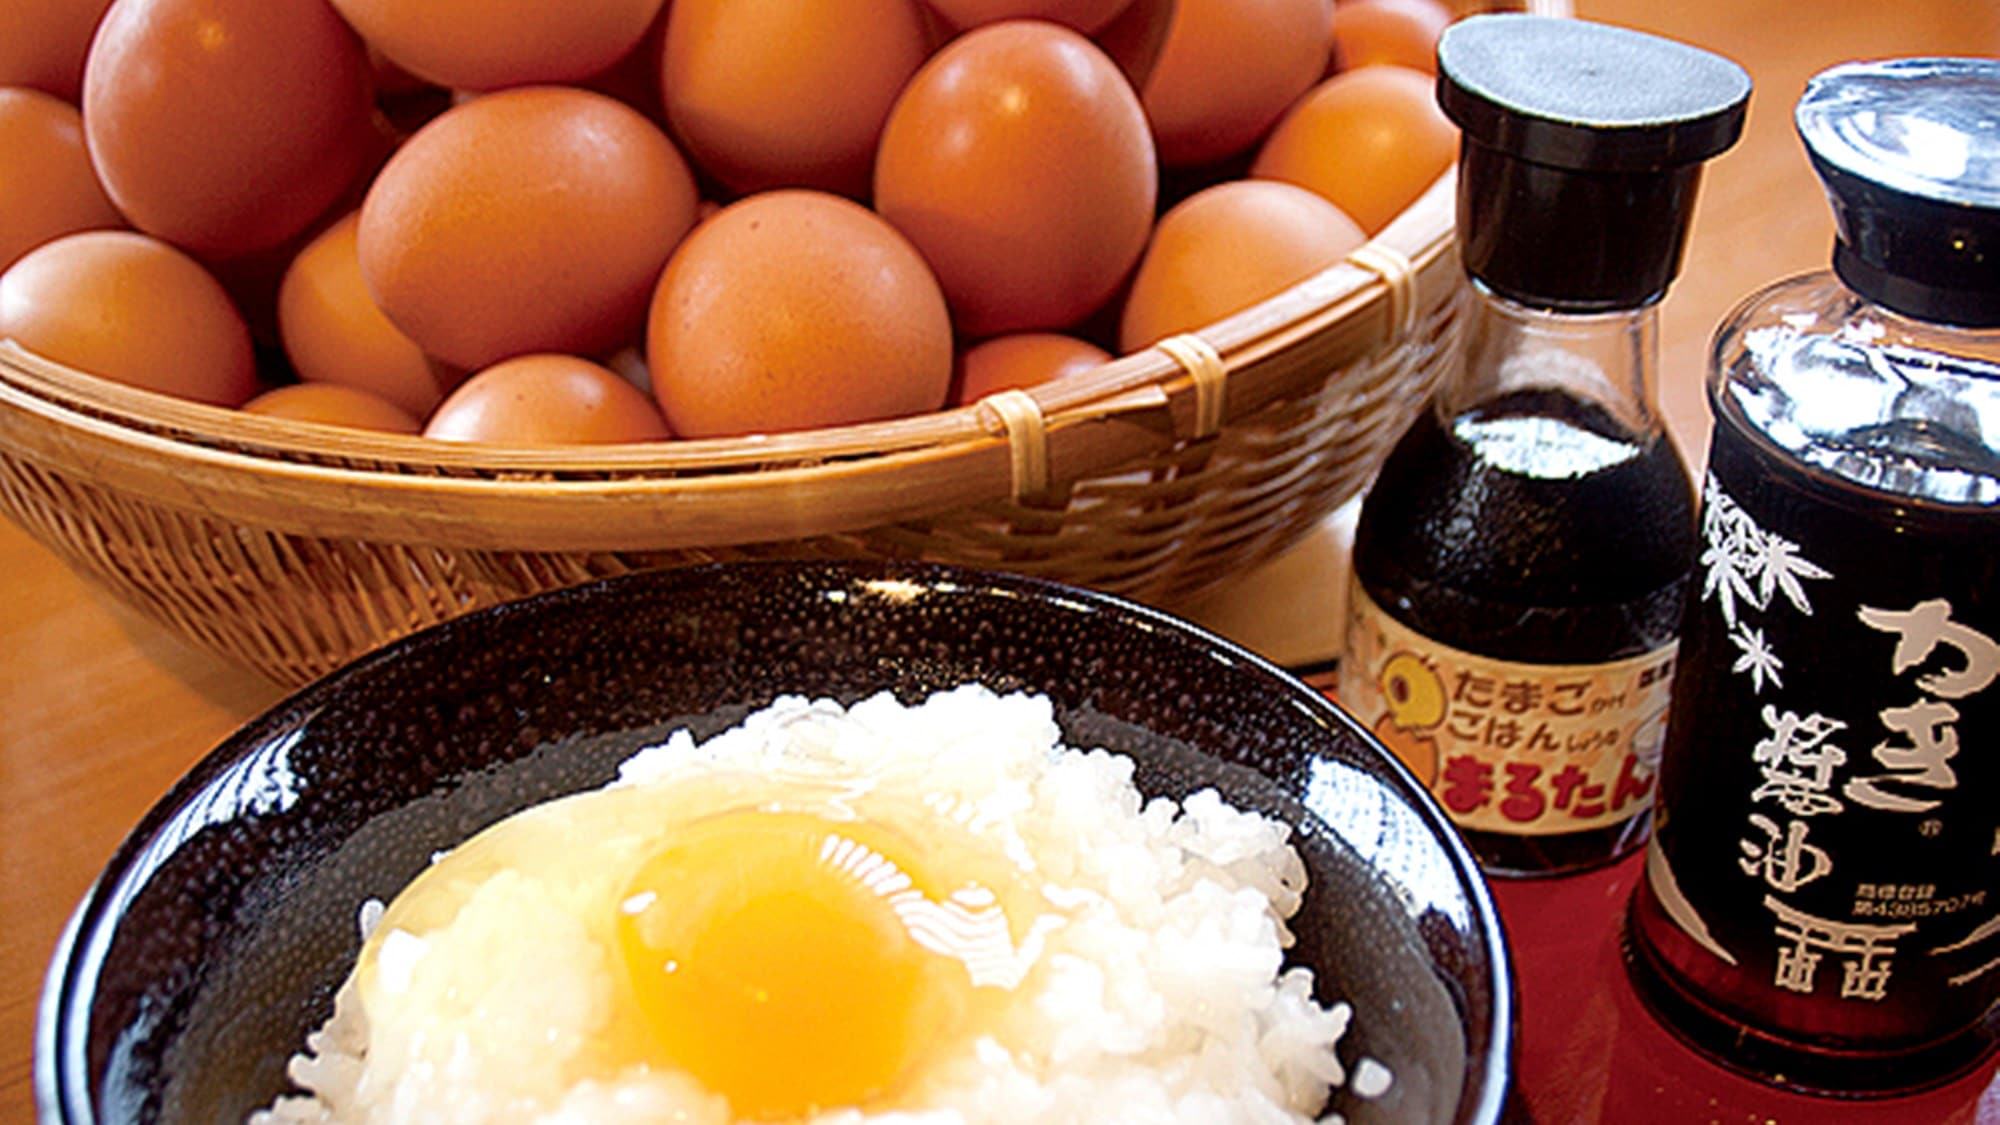 *[Breakfast example] At breakfast, we serve egg-cooked rice from Tanguma, located deep in the mountains of Hyogo Prefecture, which is well-known for its omelet-cooked rice with long queues!